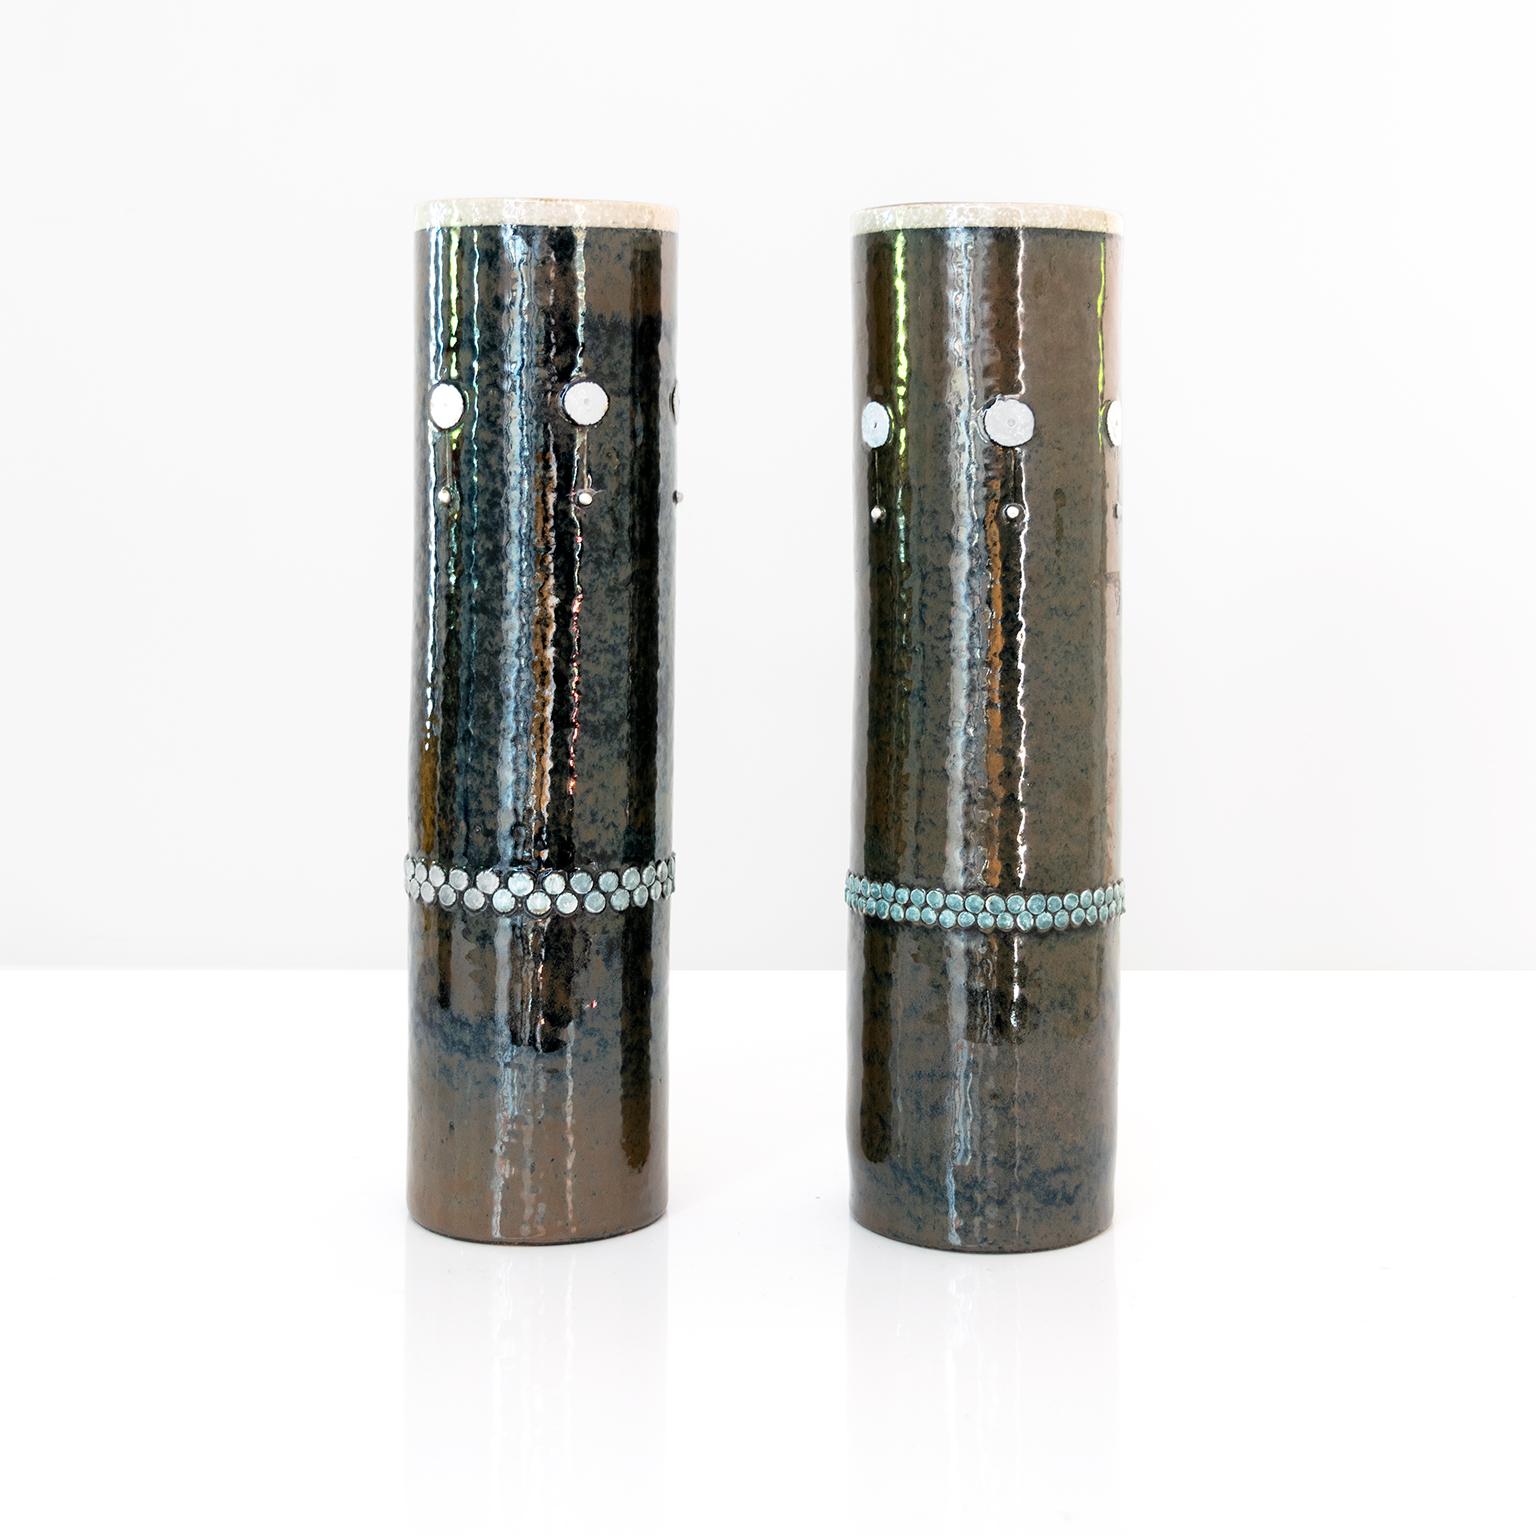 Two elegant tall Scandinavian Modern midcentury ceramic studio vases with raised elements and finished in a dark glaze by designer Sylvia Leuchovius for Rorstrand, Sweden.

Dimensions: Height: 14.5” Diameter: 4”.